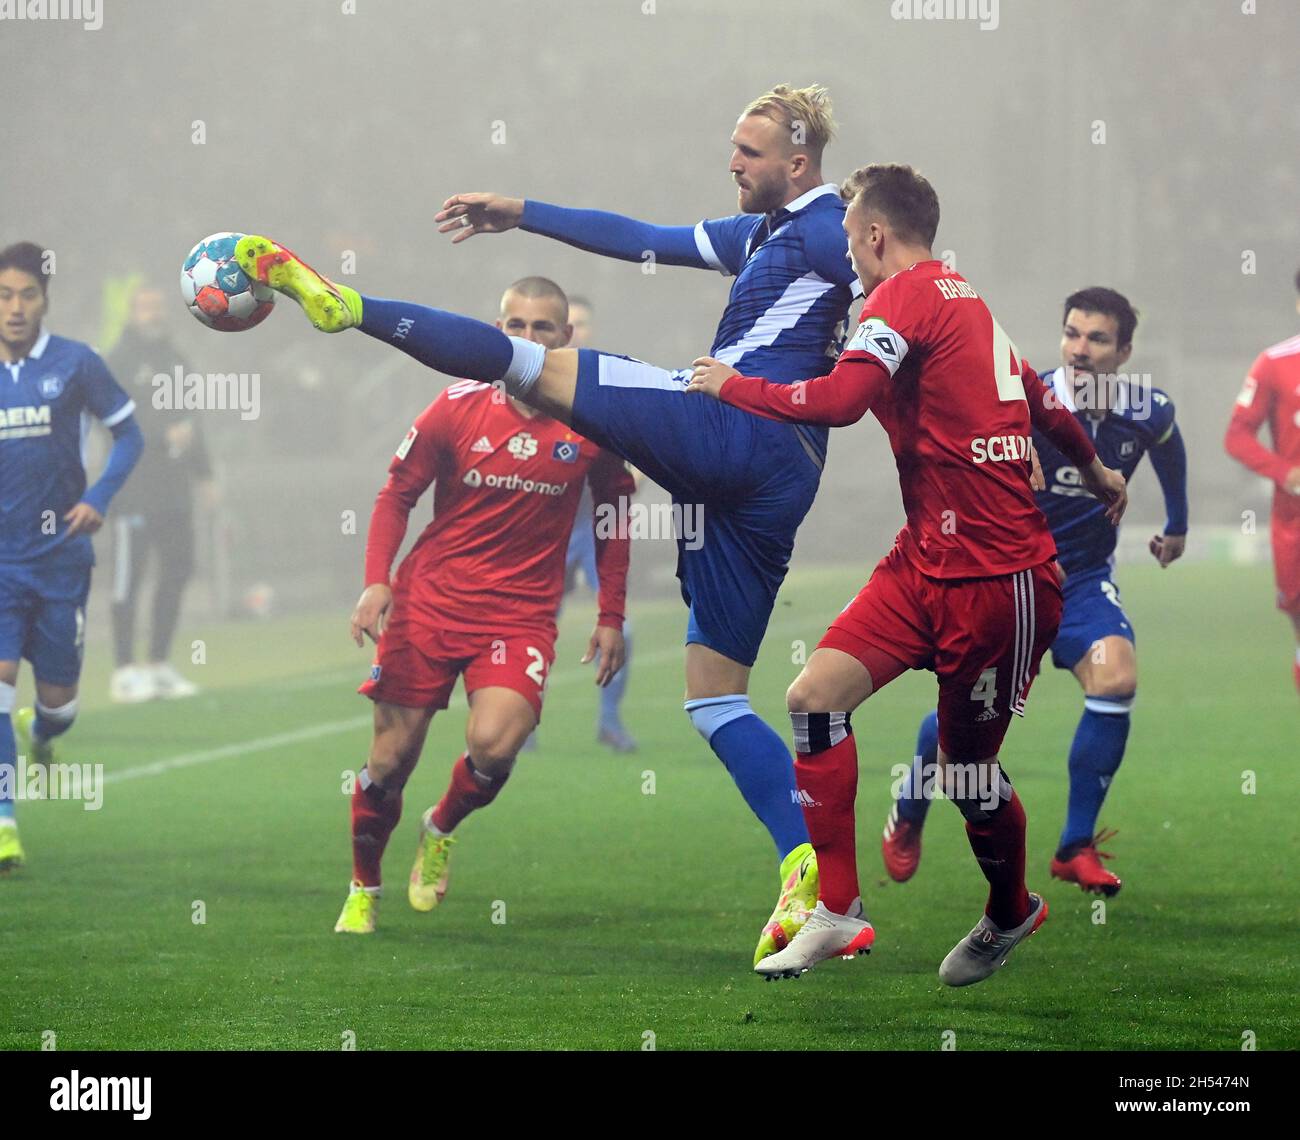 Karlsruhe, Germany. 06th Nov, 2021. Football: 2nd Bundesliga, Karlsruher SC - Hamburger SV, Matchday 13, at BBBank Wildpark. Karlsruhe's Philipp Hofmann (l) and Hamburg's Sebastian Schonlau fight for the ball. Credit: Uli Deck/dpa - IMPORTANT NOTE: In accordance with the regulations of the DFL Deutsche Fußball Liga and/or the DFB Deutscher Fußball-Bund, it is prohibited to use or have used photographs taken in the stadium and/or of the match in the form of sequence pictures and/or video-like photo series./dpa/Alamy Live News Stock Photo